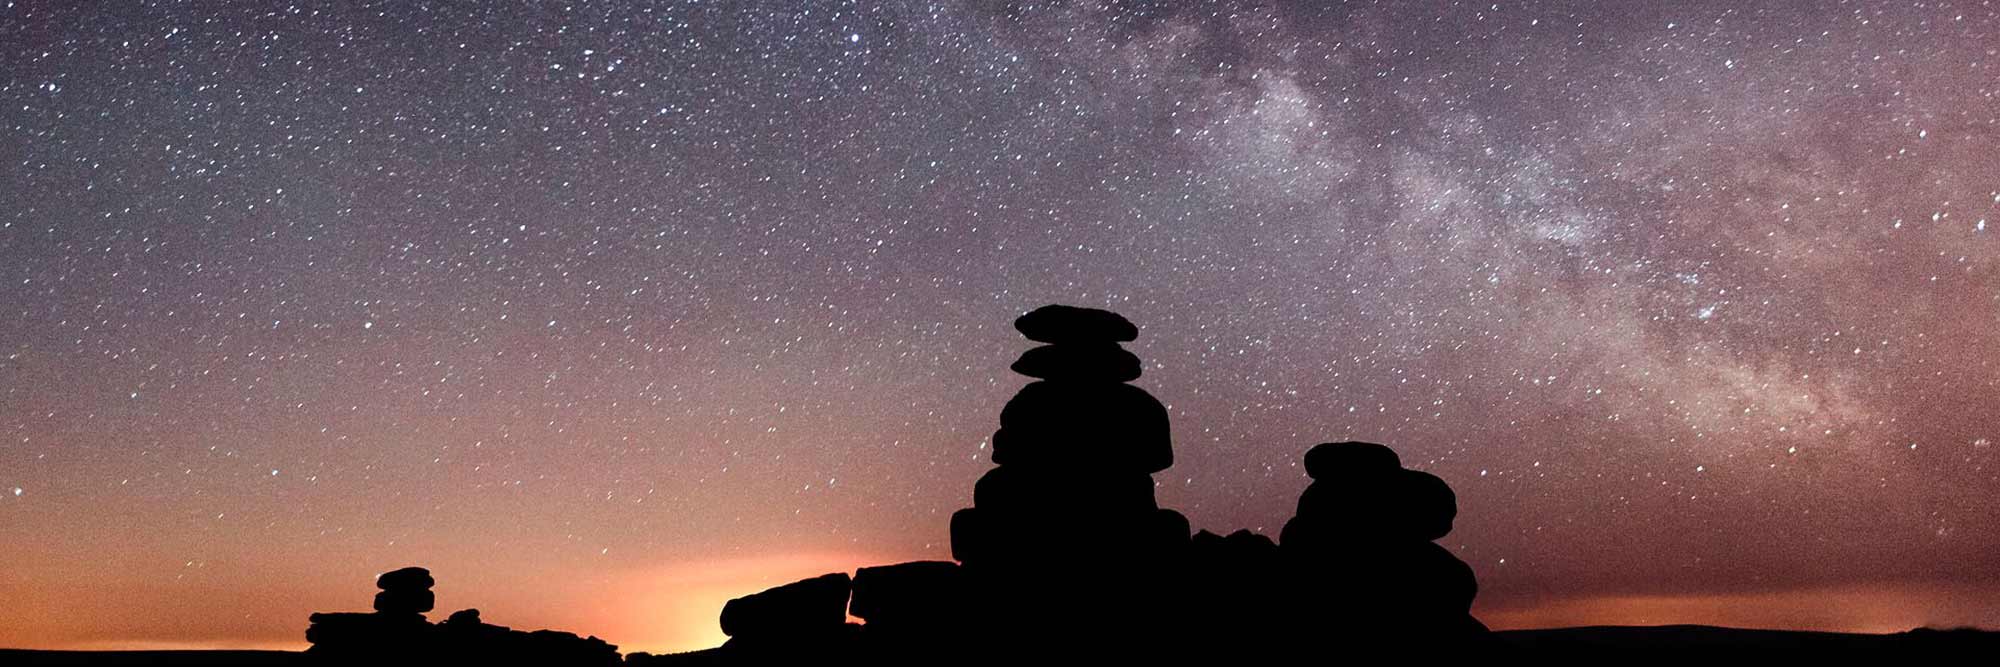 Smooth rock pillars against a starry sky at night